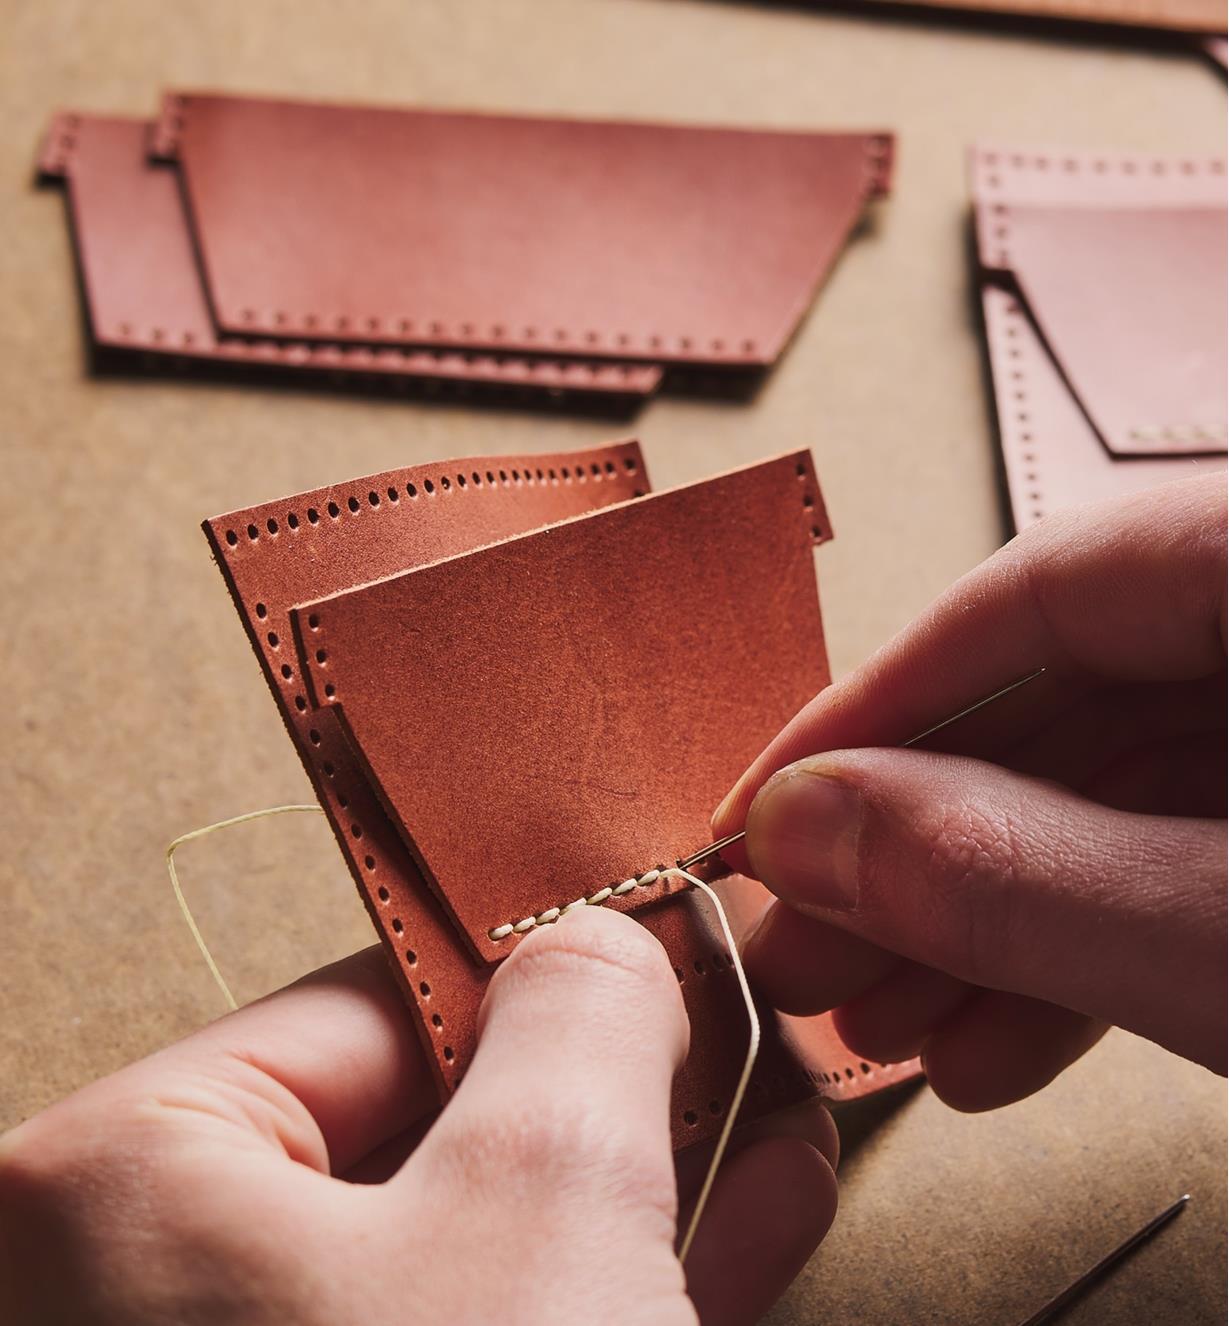 Sewing two pieces of leather together